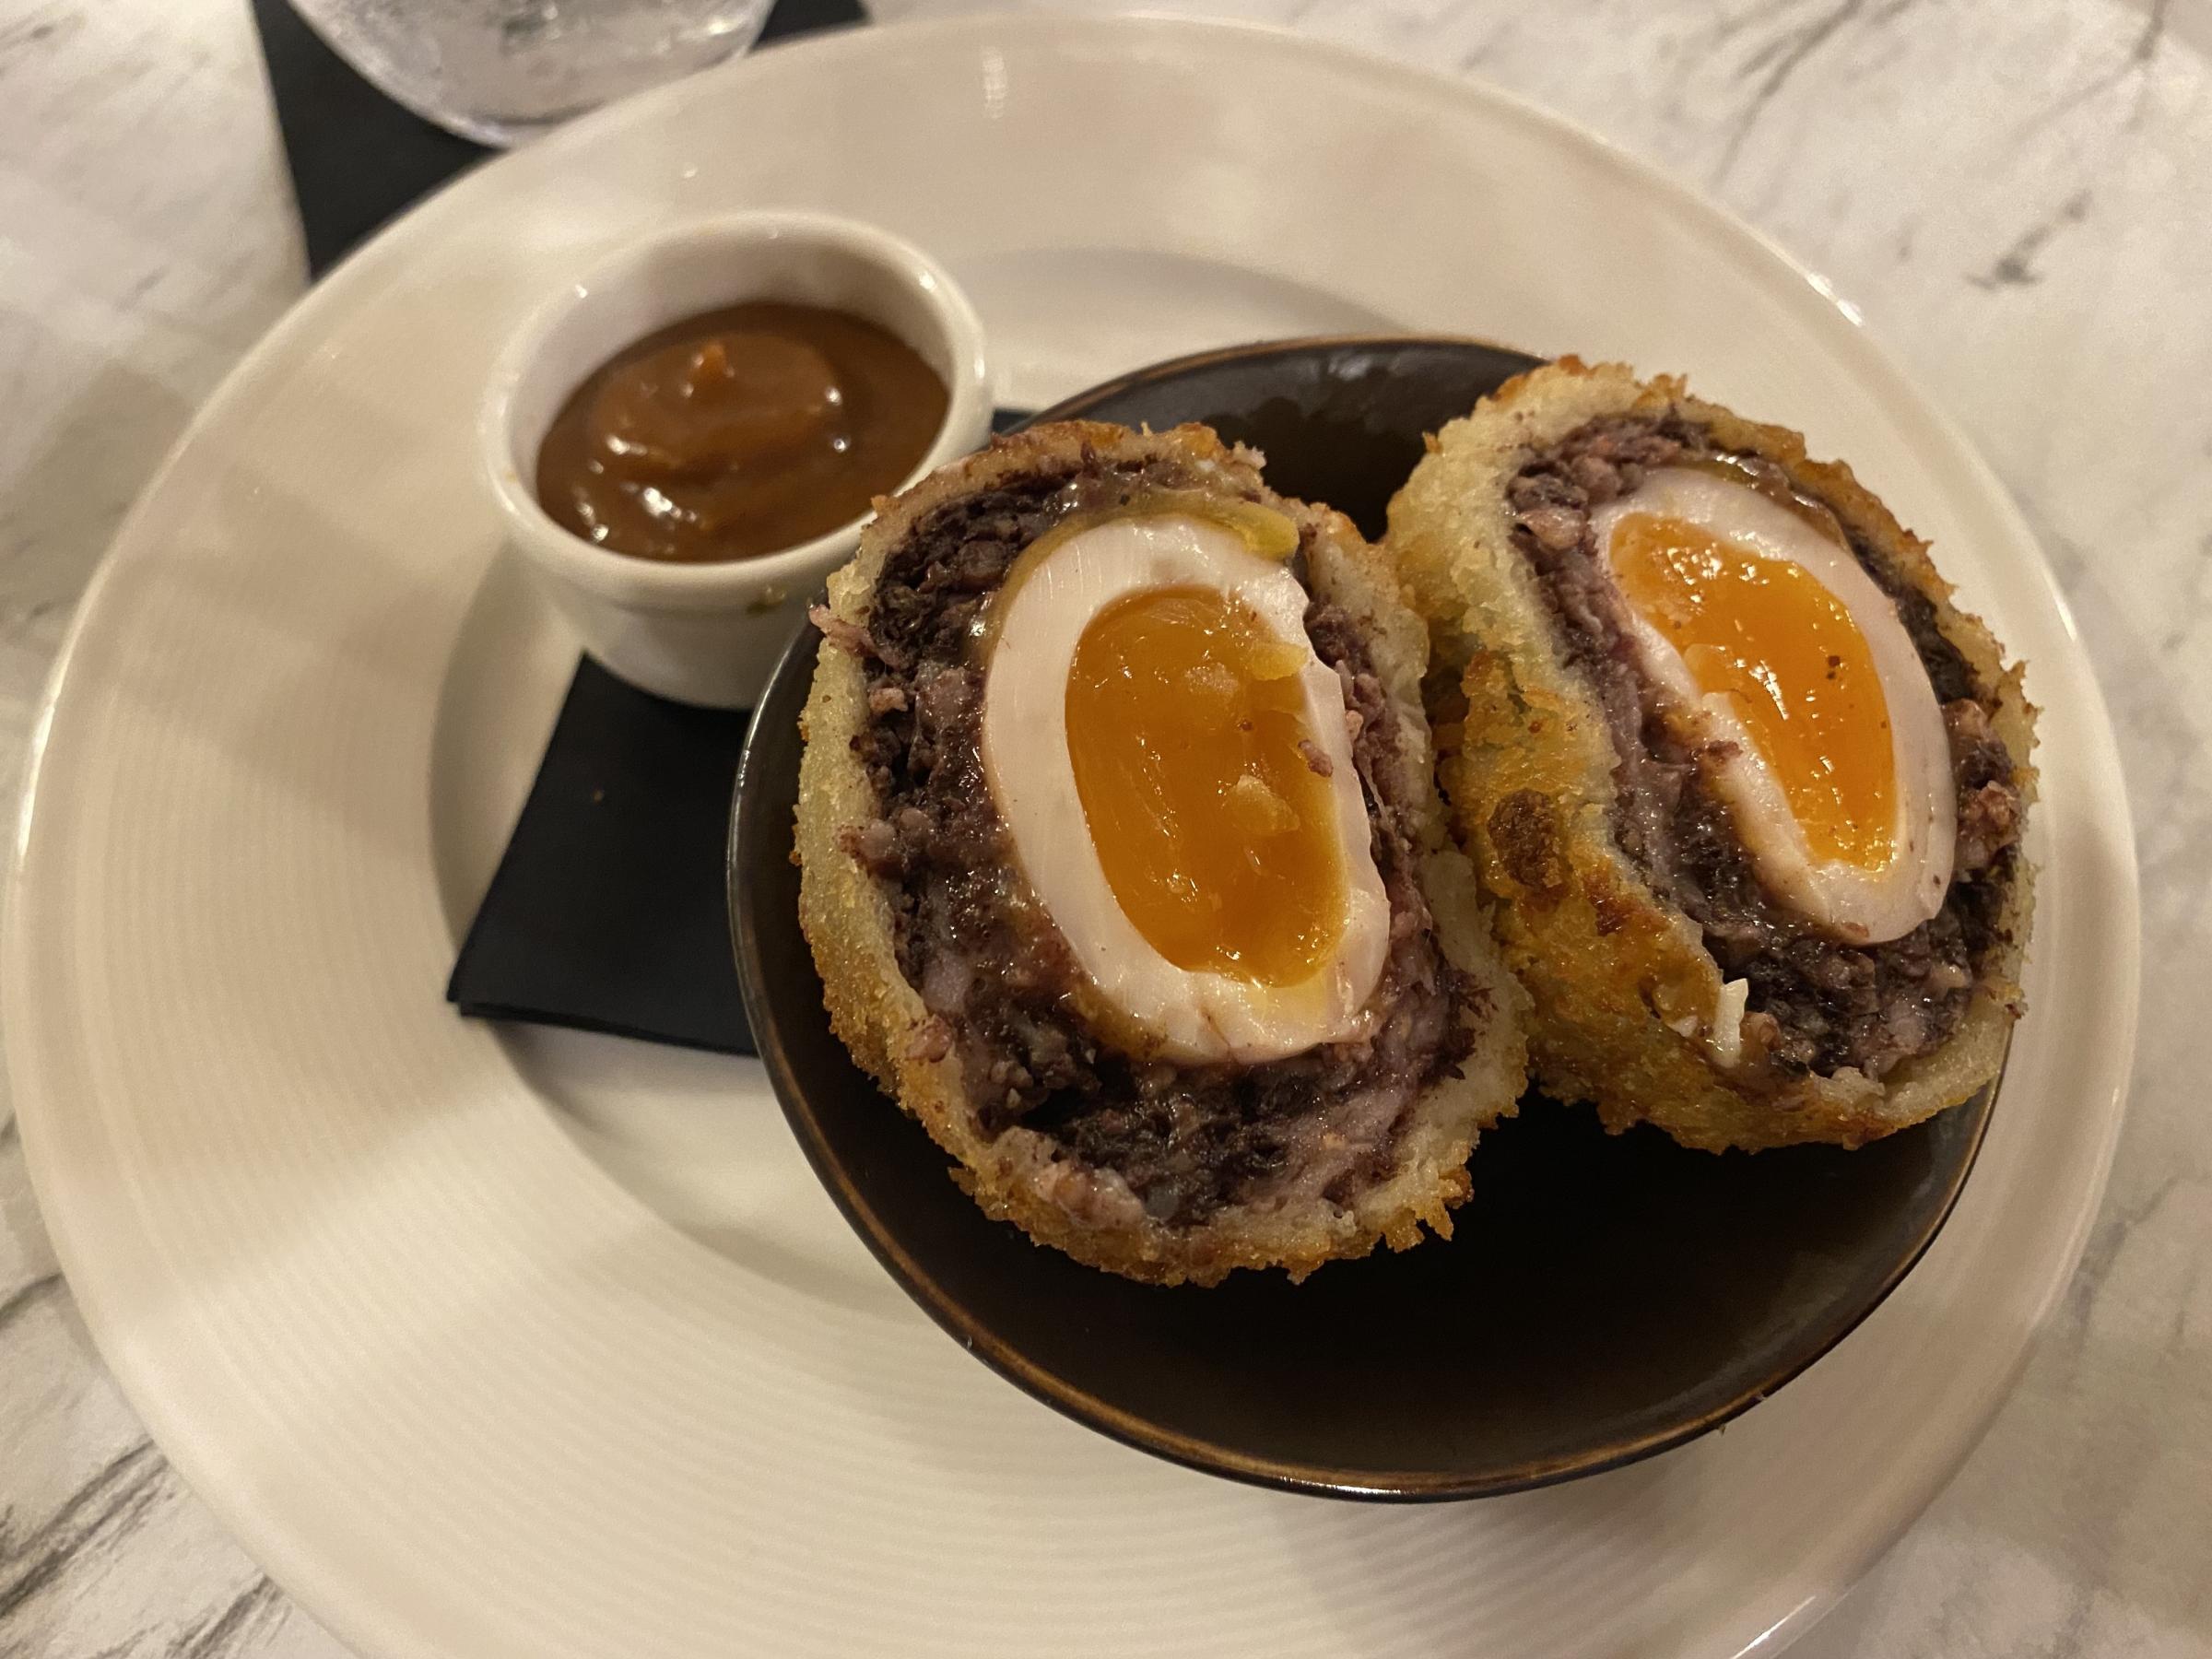 The Scotch egg at Tom and Nellies, with black pudding in place of the traditional sausage meat